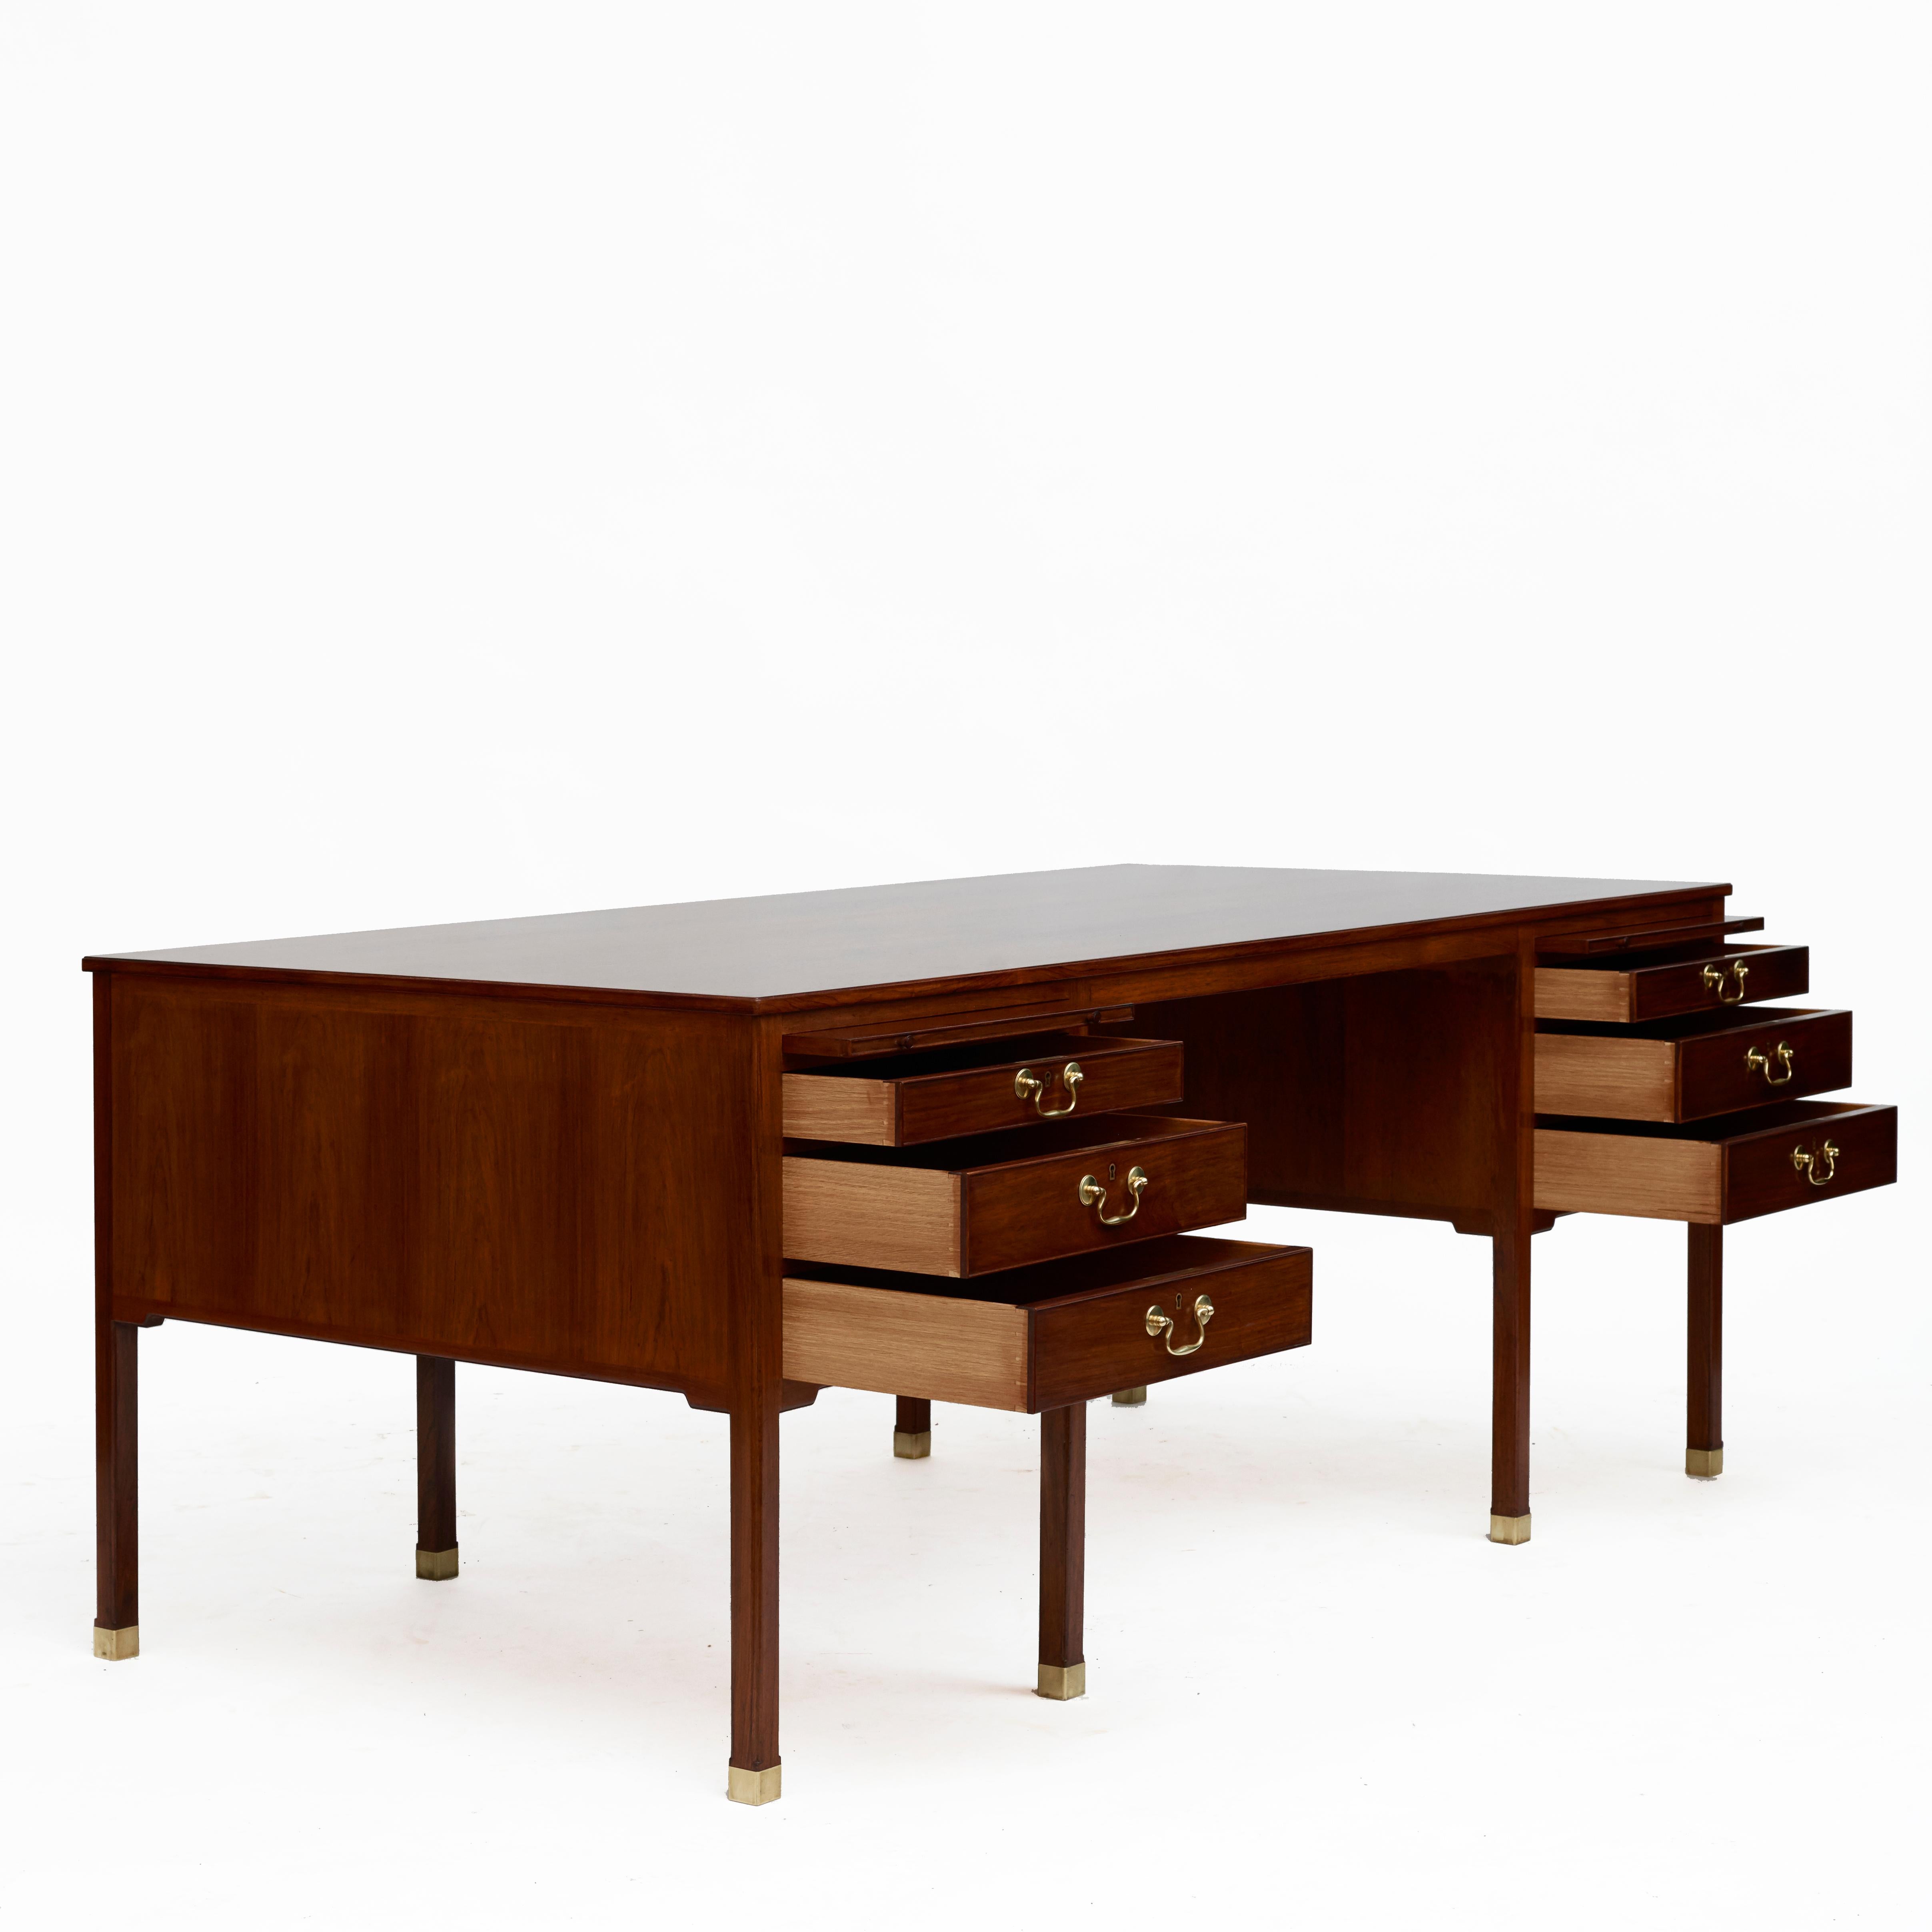 Jacob Kjær (1896-1957)
A rare one-of-a-kind freestanding Jacob Kjaer bureau-plat or desk.
Masterfully crafted in rosewood with original brass details.
Designed and executed in cabinetmaker Jacob Kjær's own furniture workshop, Denmark, circa